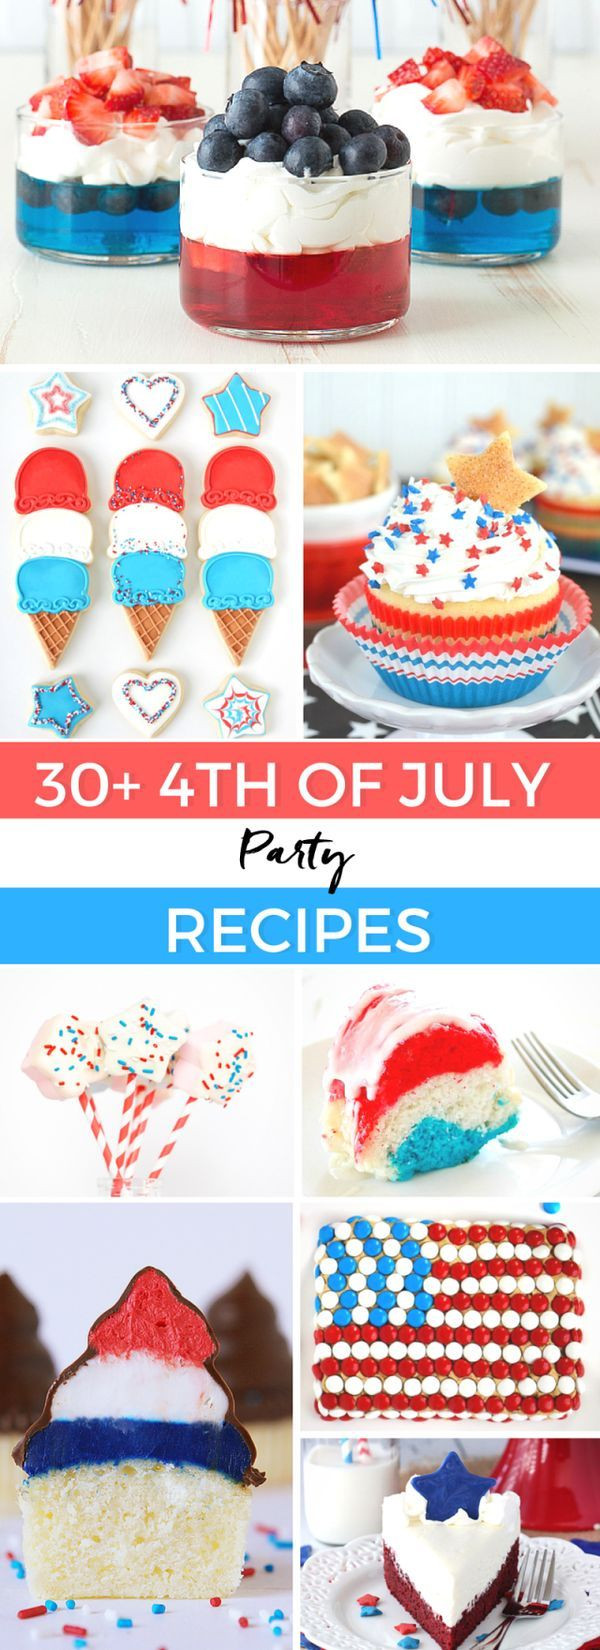 4th Of July Food Ideas Pinterest
 74 best 4th of July images on Pinterest